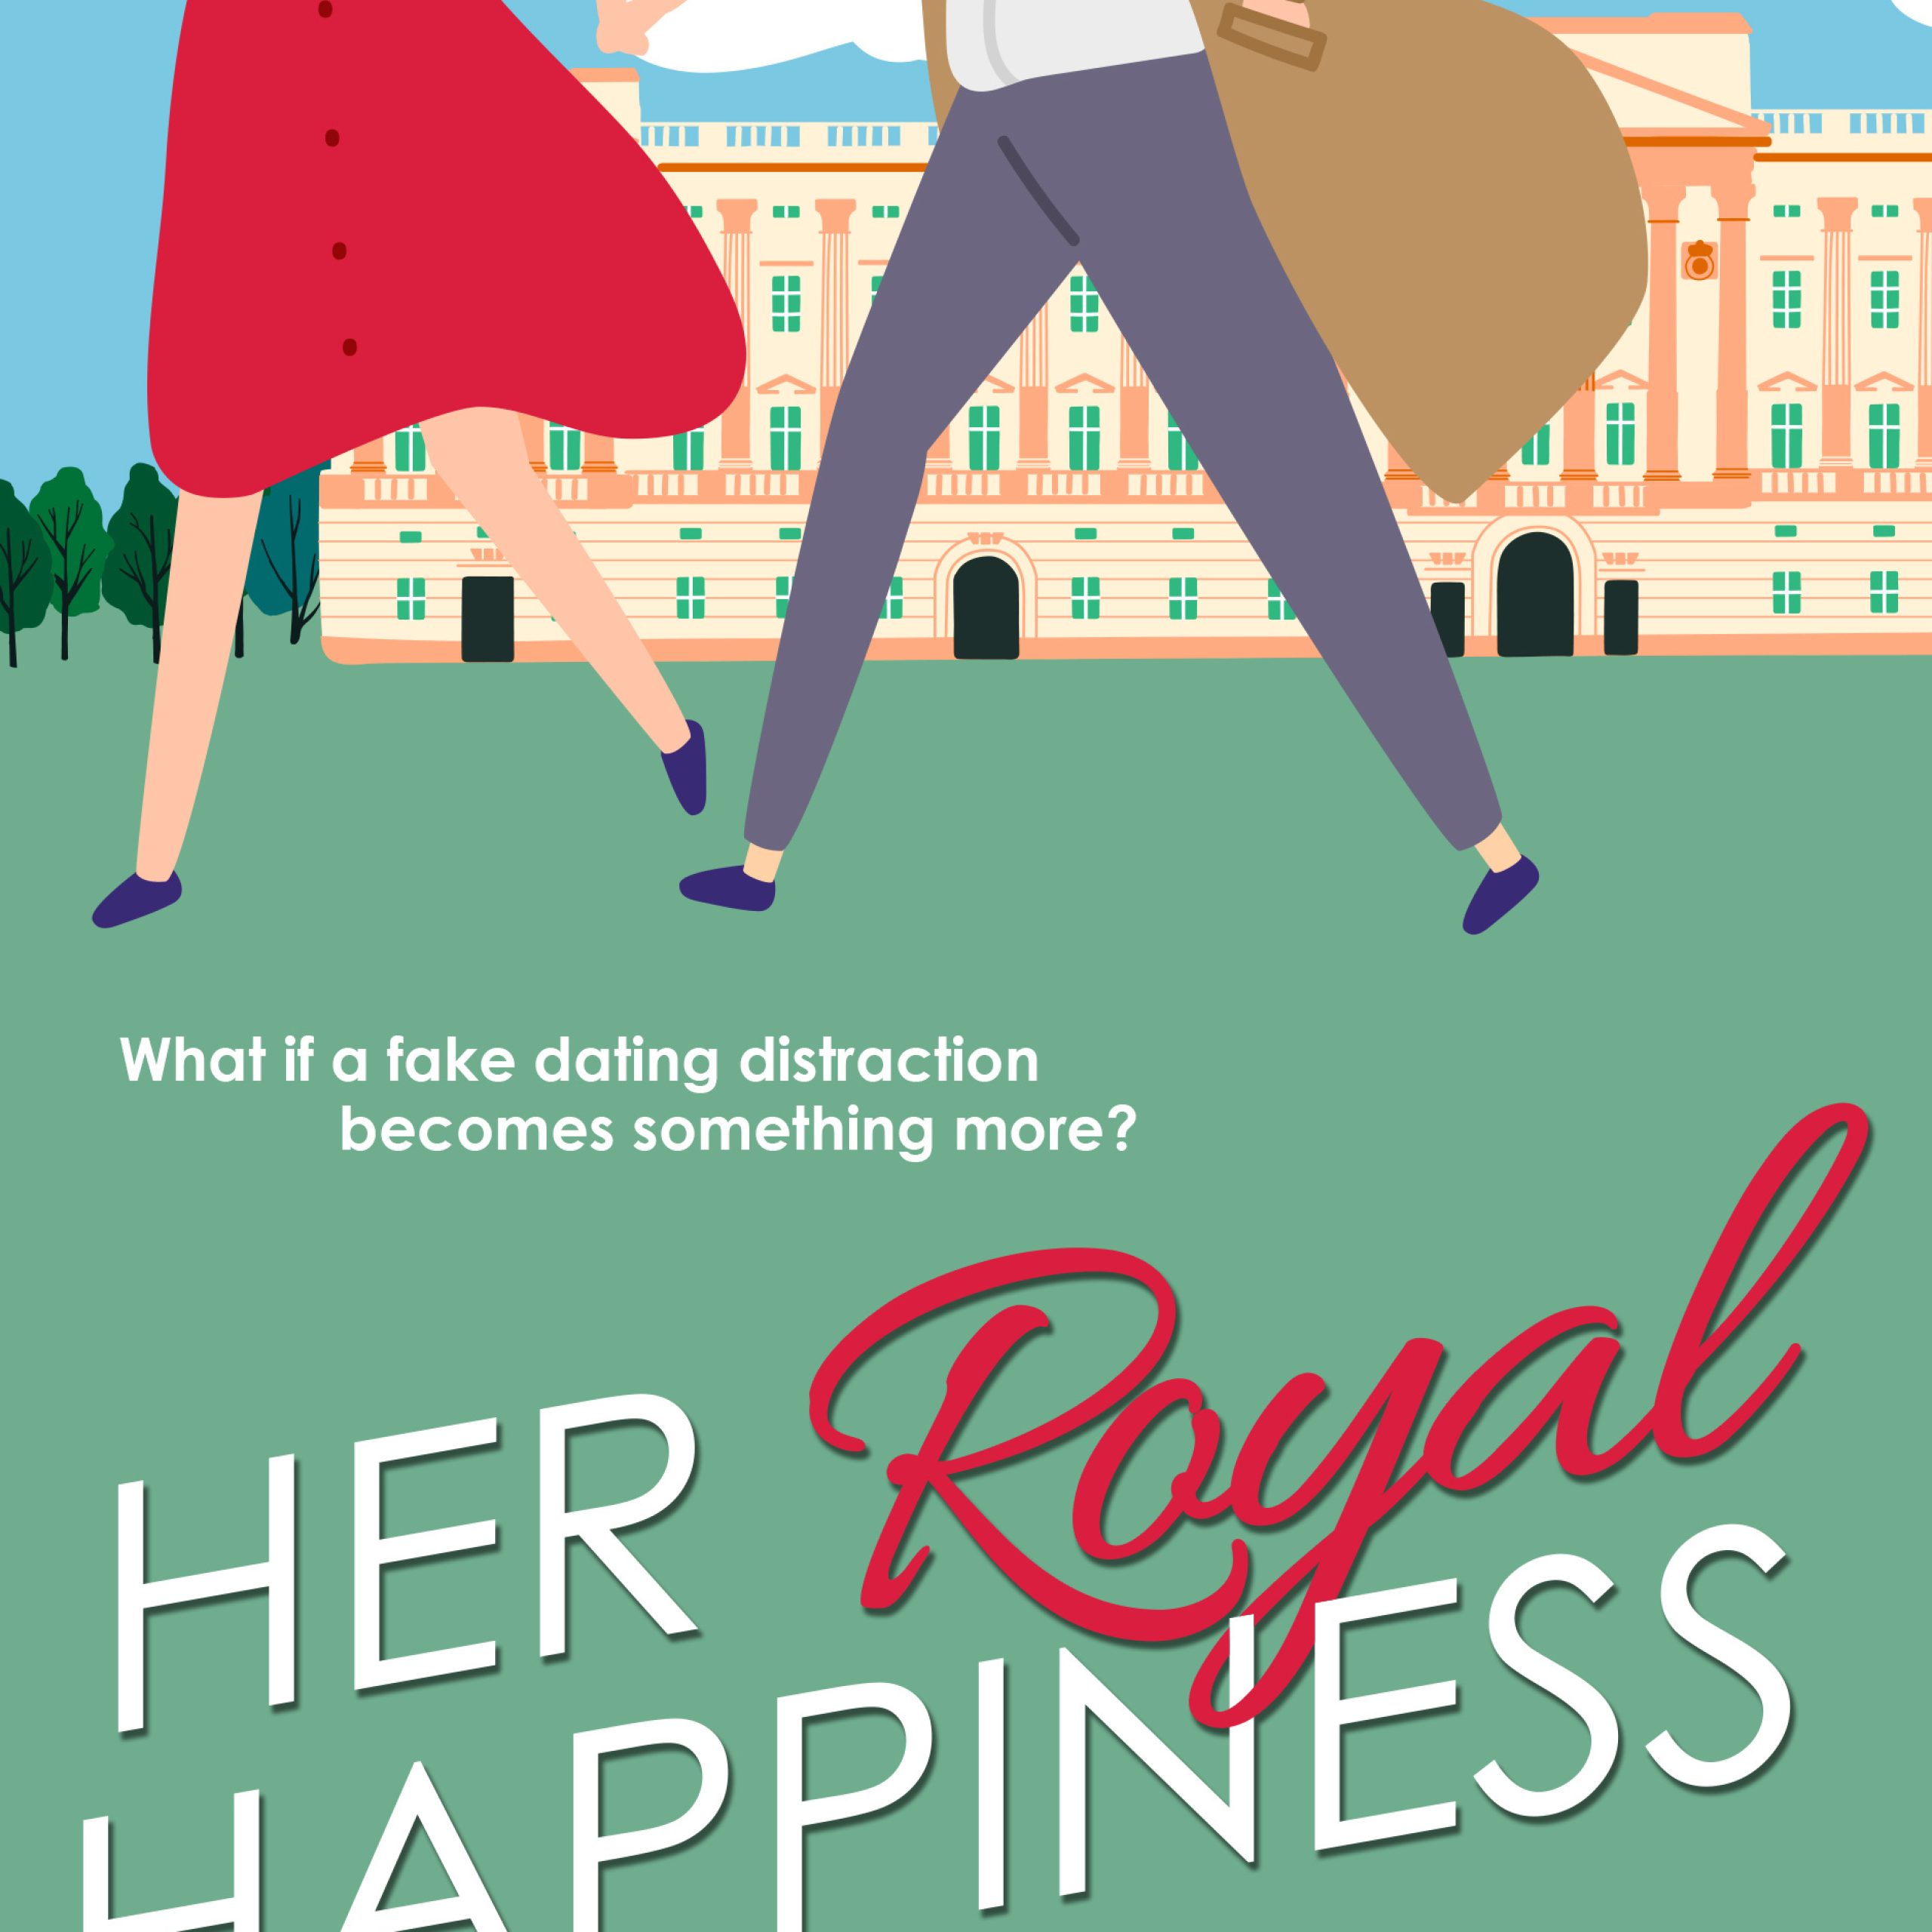 Cover of Her Royal Happiness by Lola Keeley. Two illustrated figures are shown walking across the top half of the cover with Buckingham Palace in the background. 